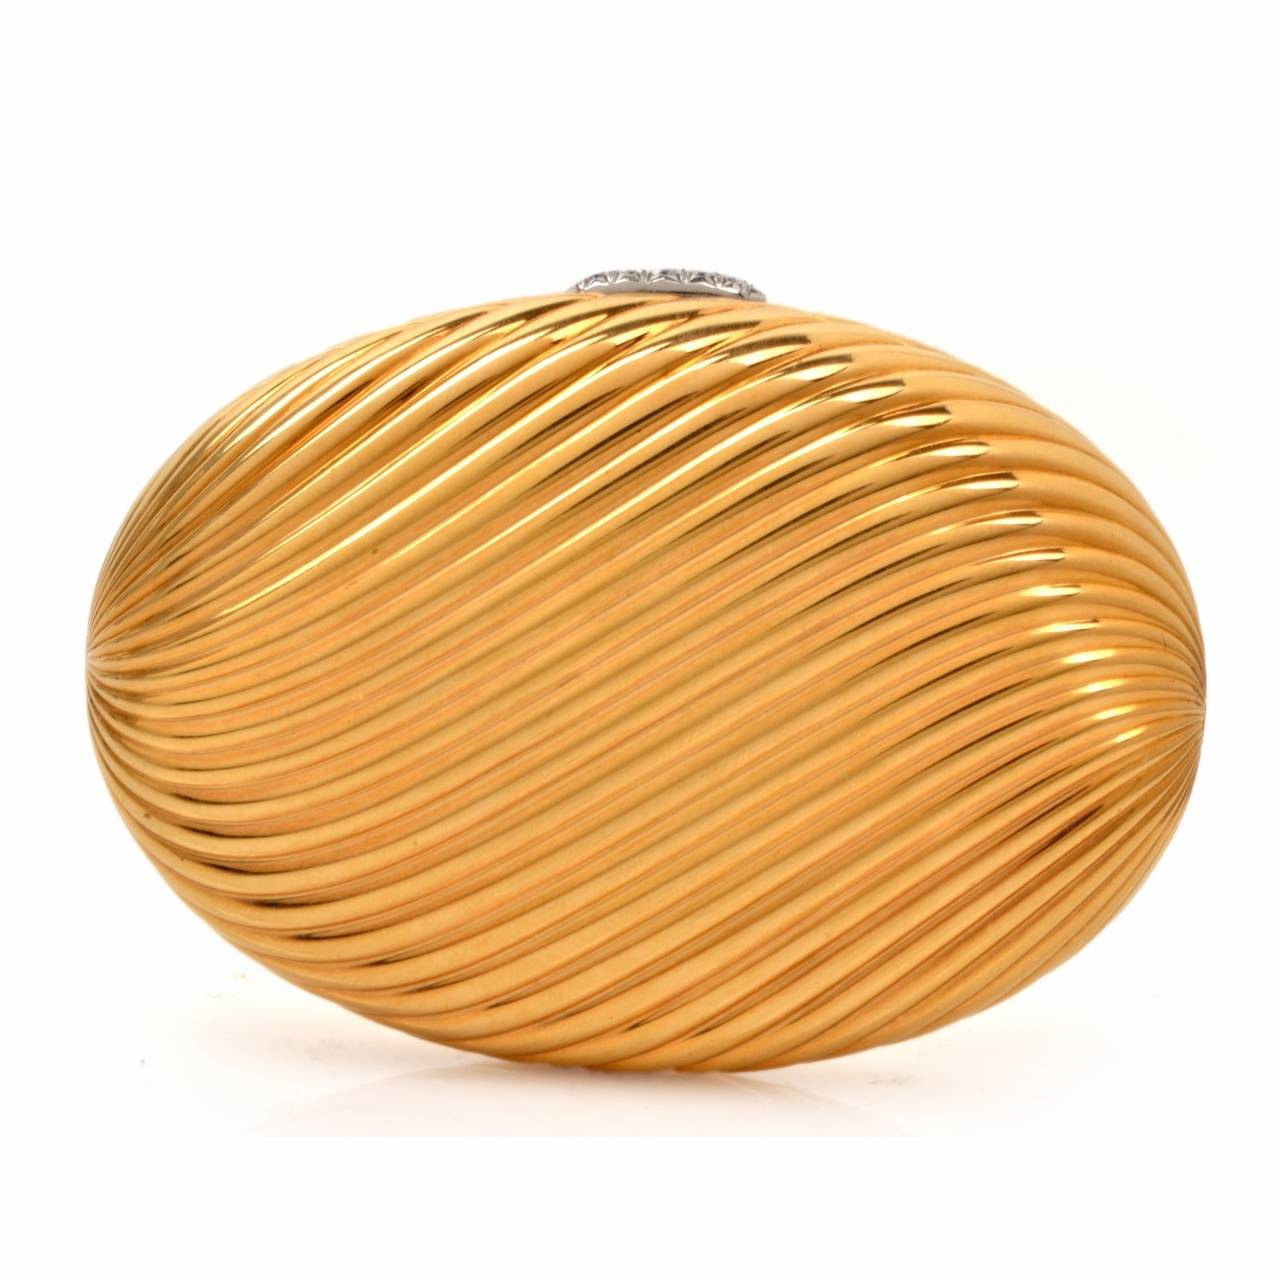 This aesthetically captivating and High polished compact box designed and signed by Bvlgari is crafted in solid 18K yellow gold, weighing 187.7 grams and measuring 3.5" x 2.5" x 0.60".  Designed as a gracefully feminine ovular